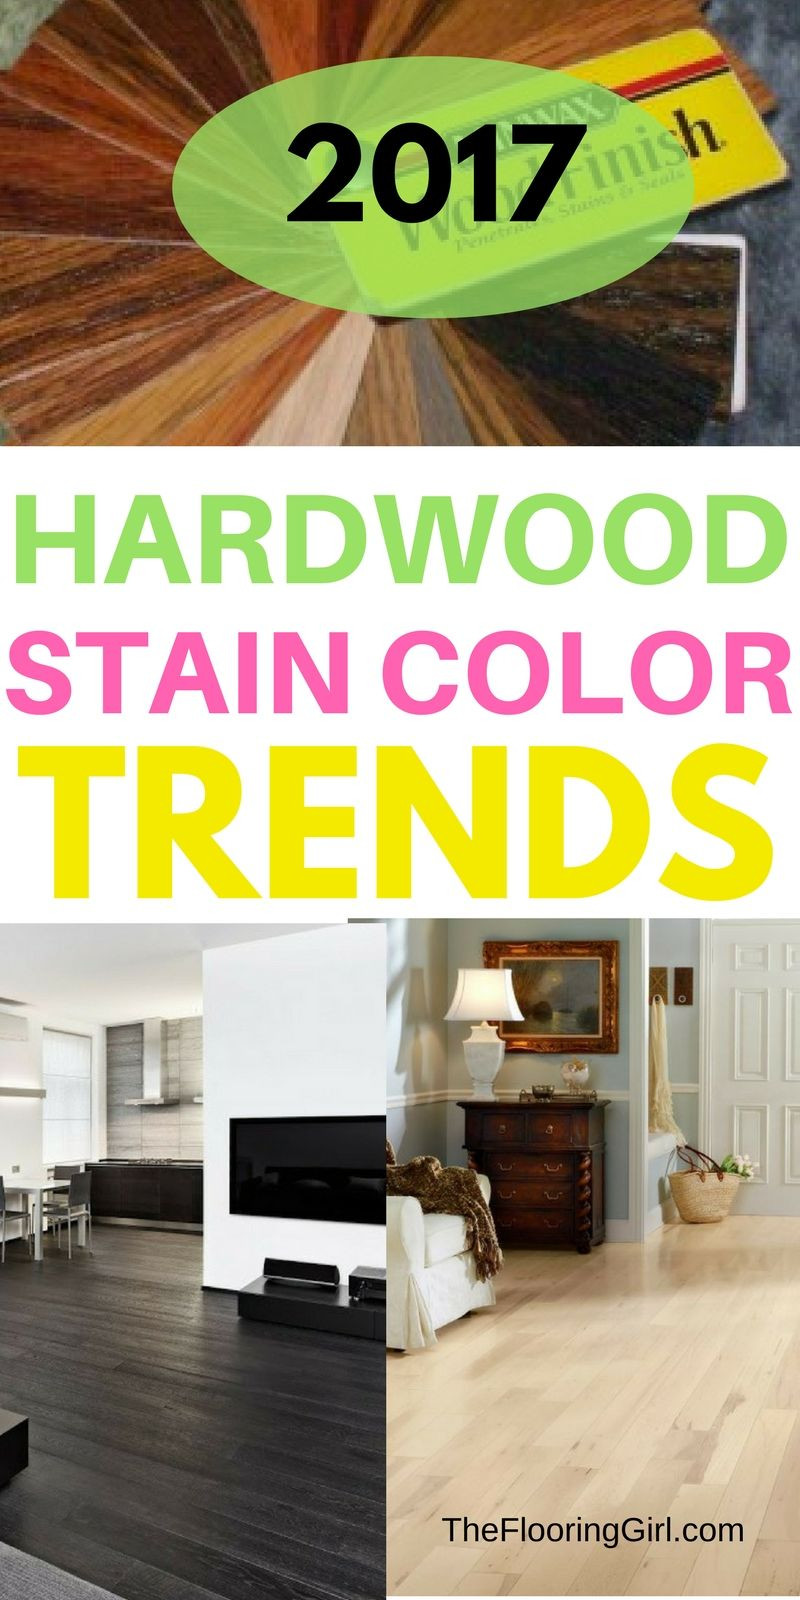 25 Elegant Hardwood Floor Pet Vacuum 2024 free download hardwood floor pet vacuum of hardwood flooring stain color trends 2018 more from the flooring inside hardwood flooring stain color trends for 2017 hardwood colors that are in style thefloori